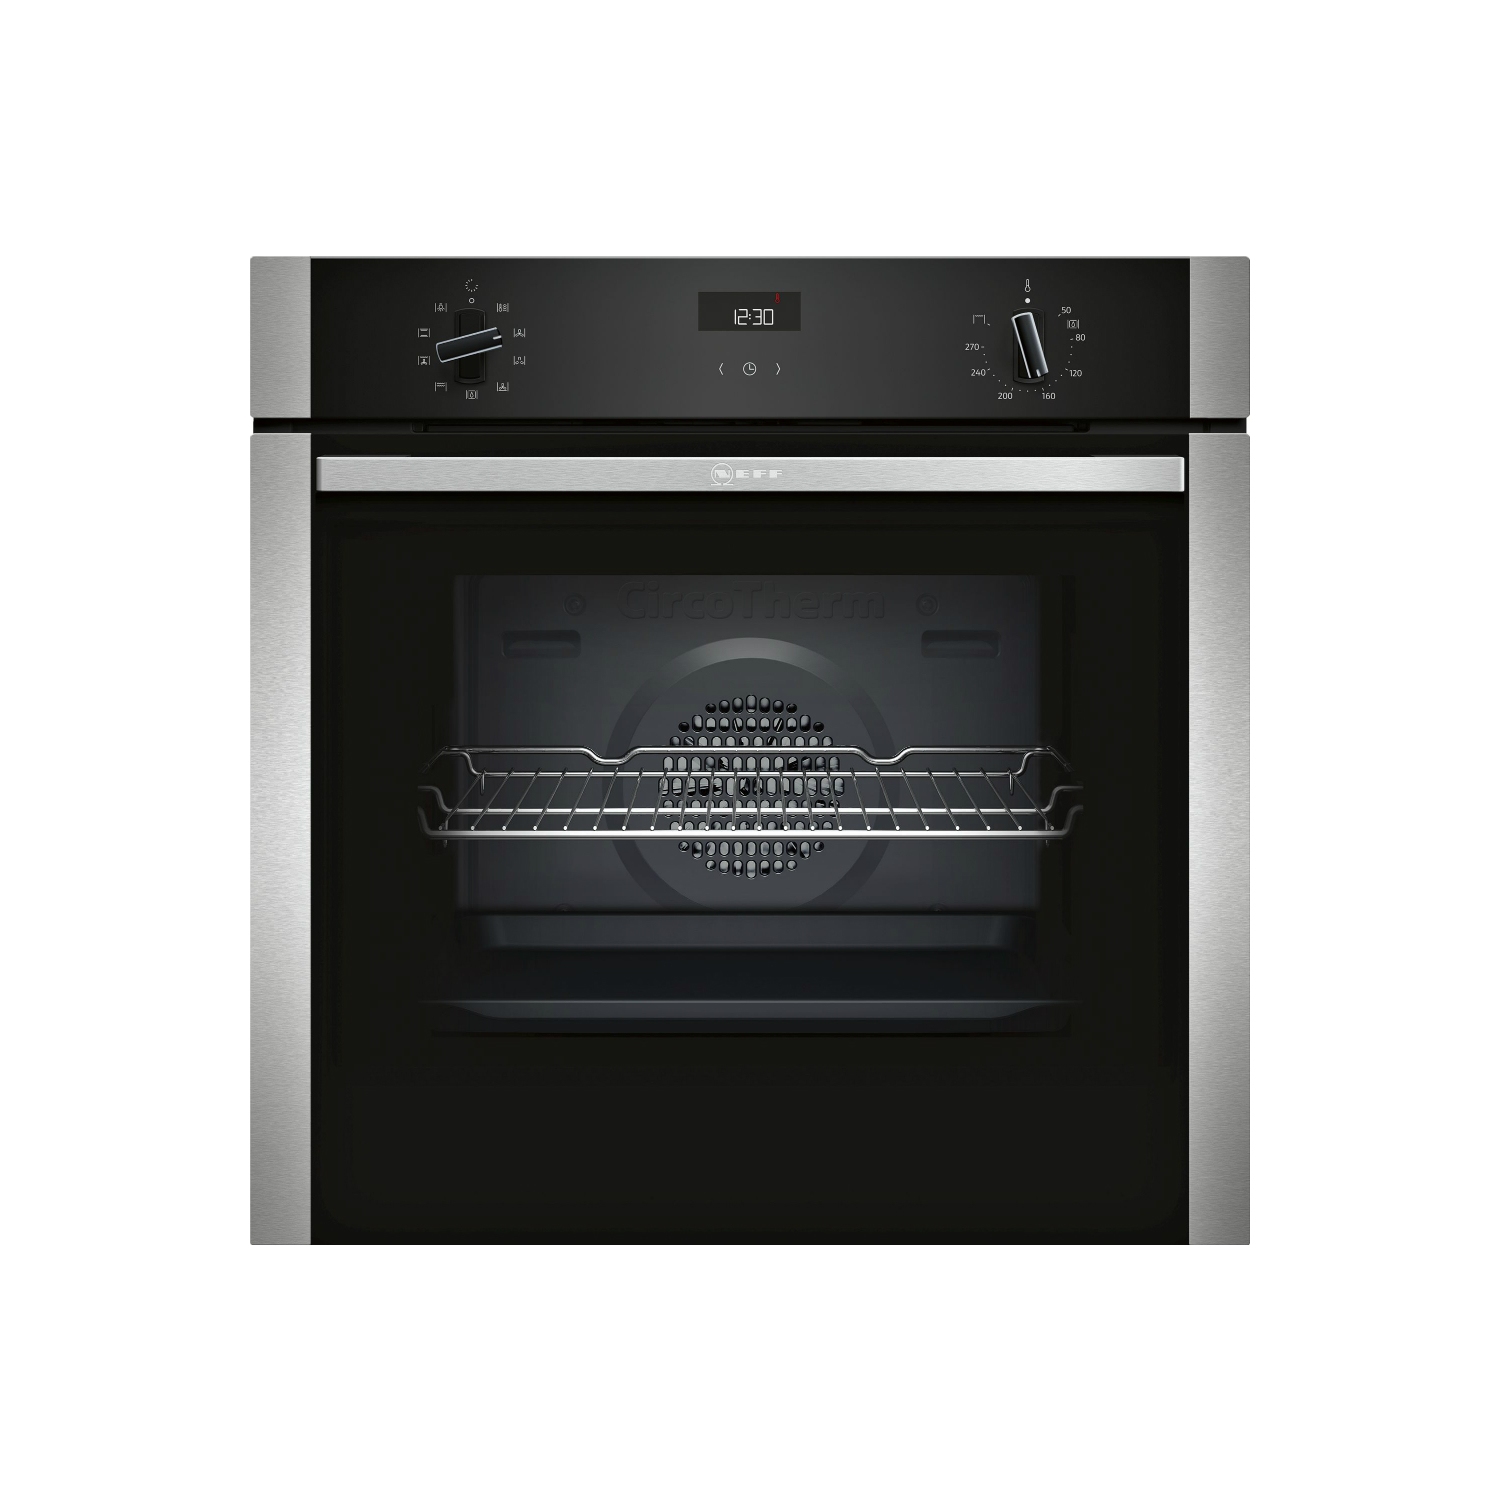 Neff Electric CircoTherm Single Oven Oven - 0